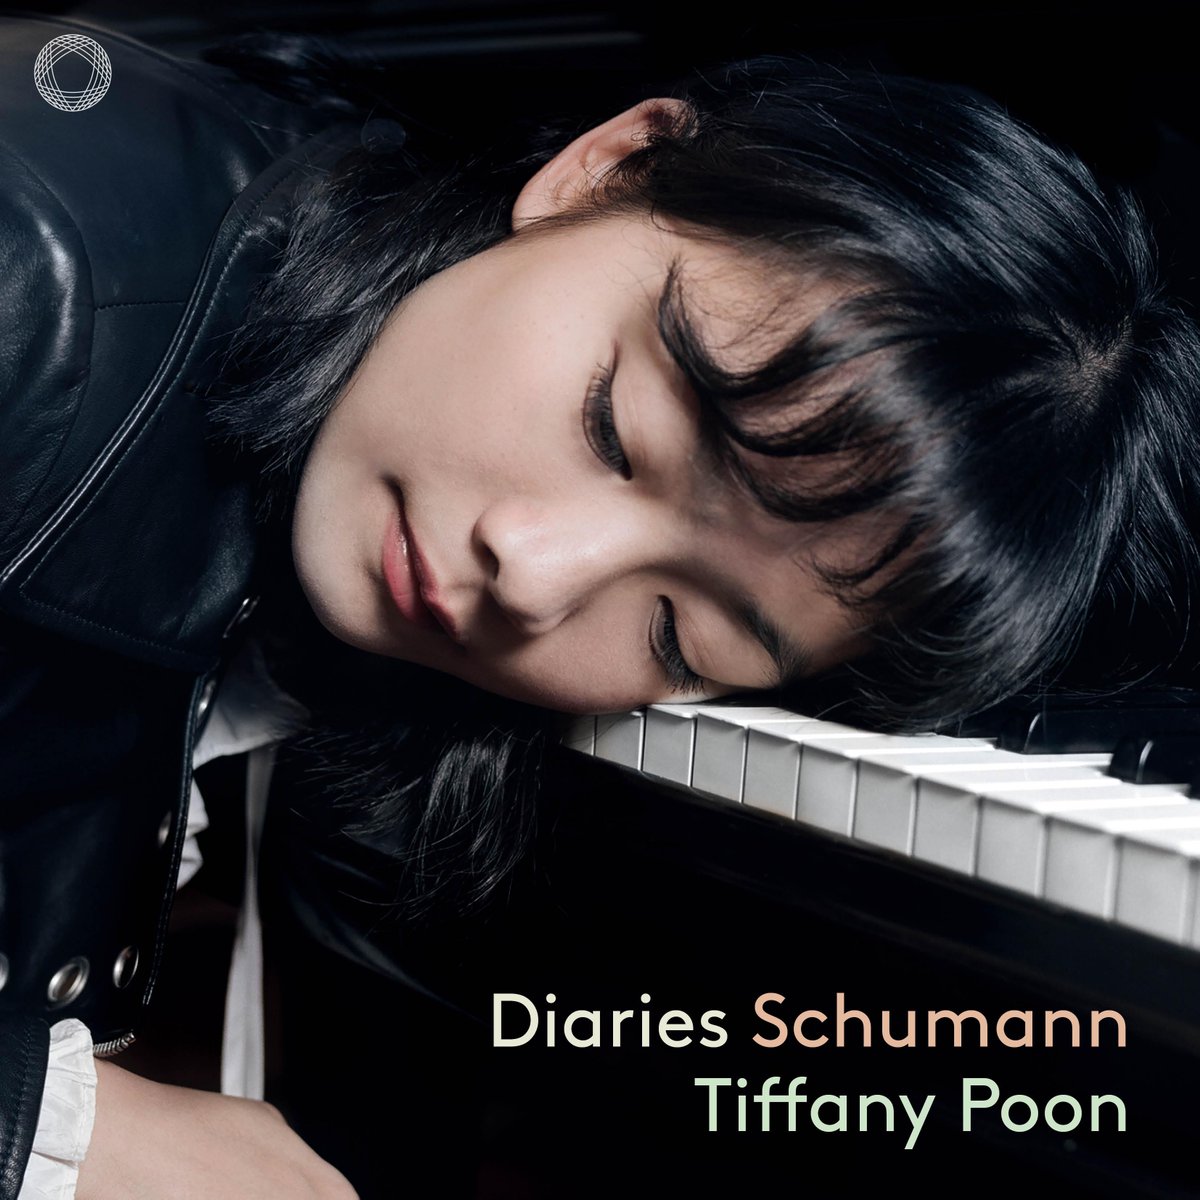 .@Tiffanypianist has been featured on the cover of two @TIDAL’s playlists: Encore: New in Classical & Classical: Dolby Atmos! LISTEN to the playlists and the album 'Diaries: Schumann' NOW on @TIDAL ! lnk.to/DiariesSchumann